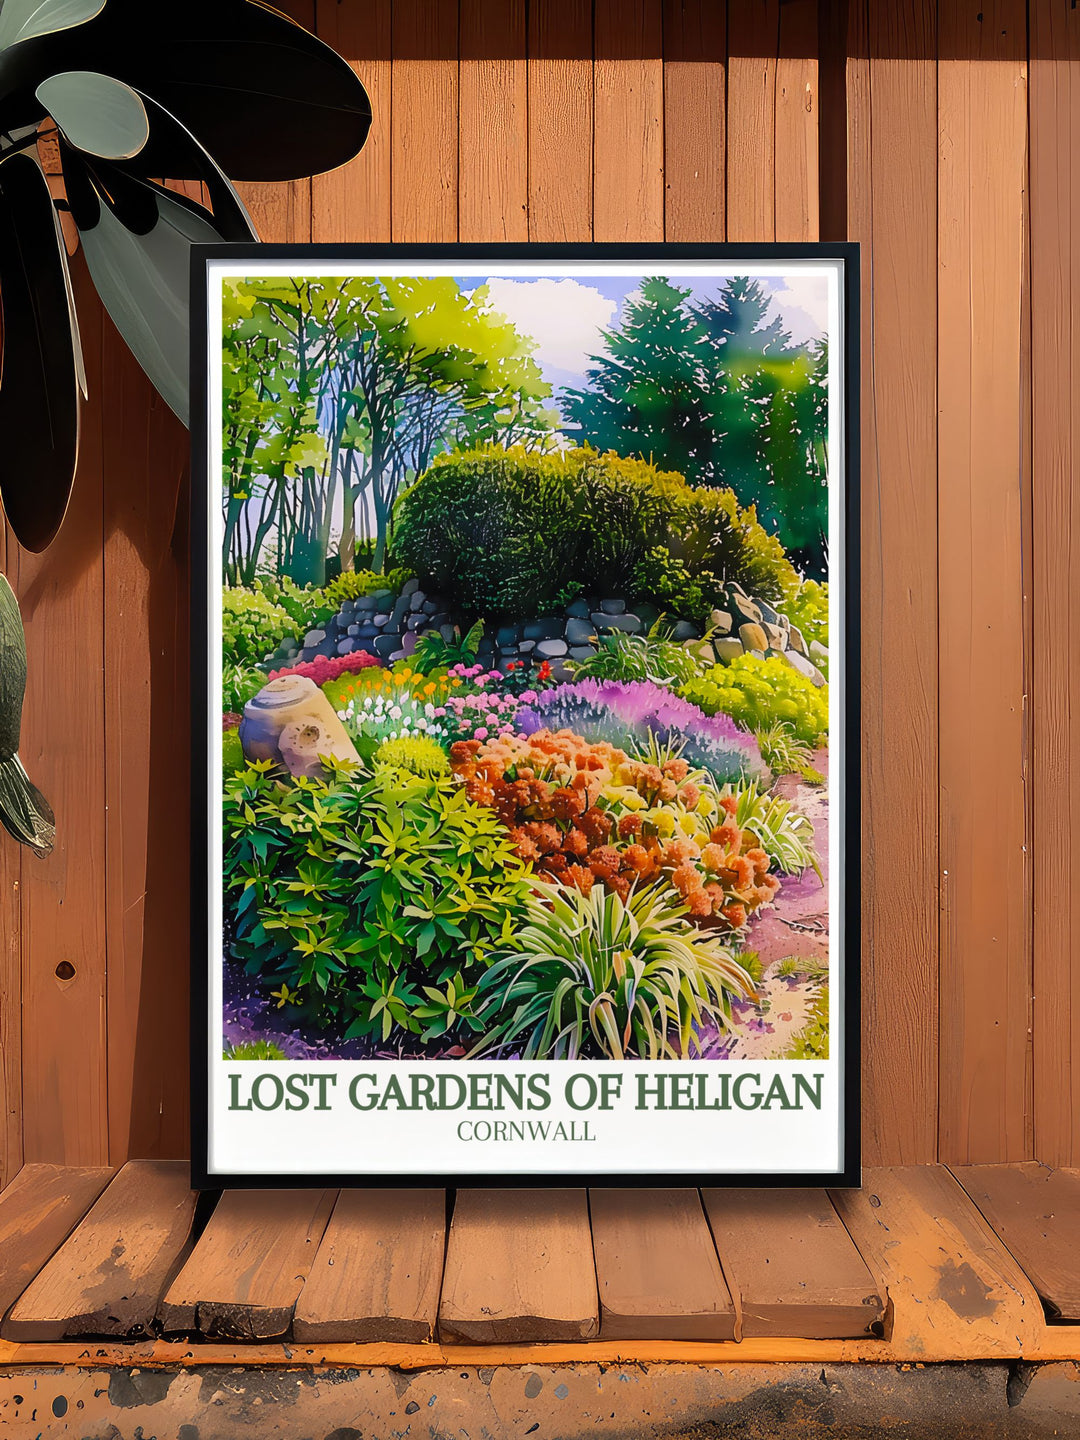 Elegant Cornwall seaside poster and Italian garden Productive gardens print featuring the stunning landscapes and iconic landmarks of Cornwall a must have for art enthusiasts and those who appreciate the regions natural beauty